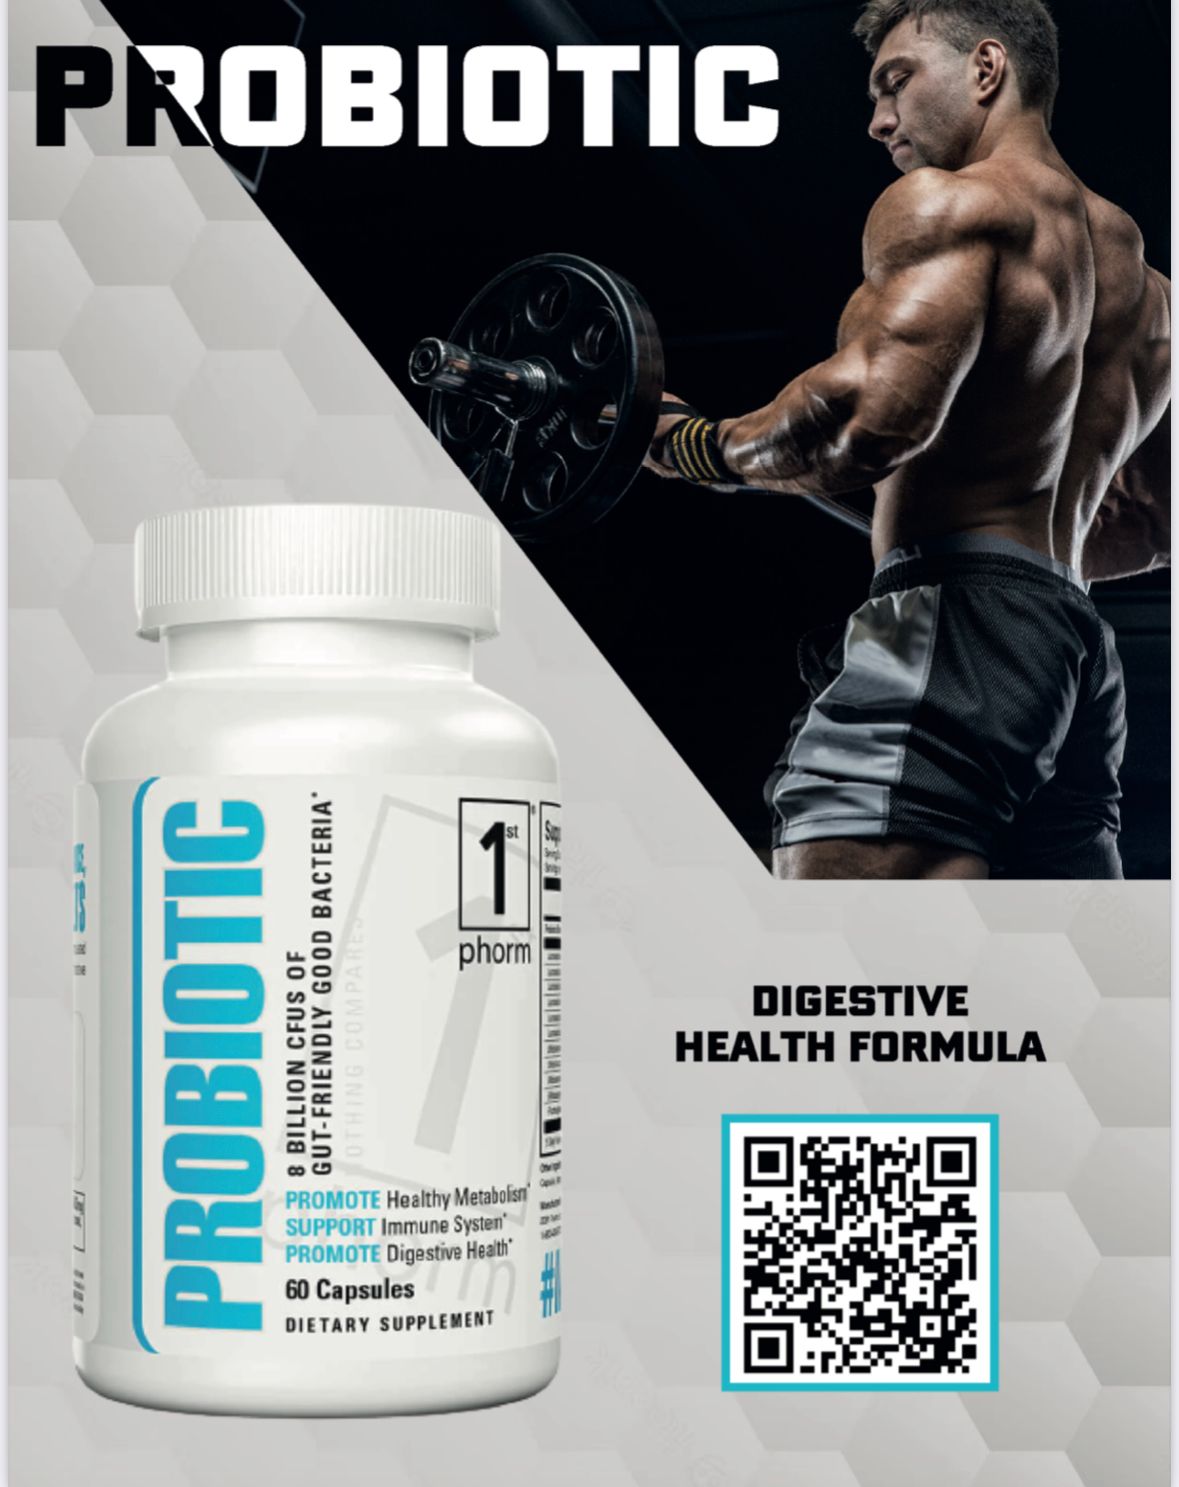 Probiotic Supplement - The Bronx, NY - Erector Masters